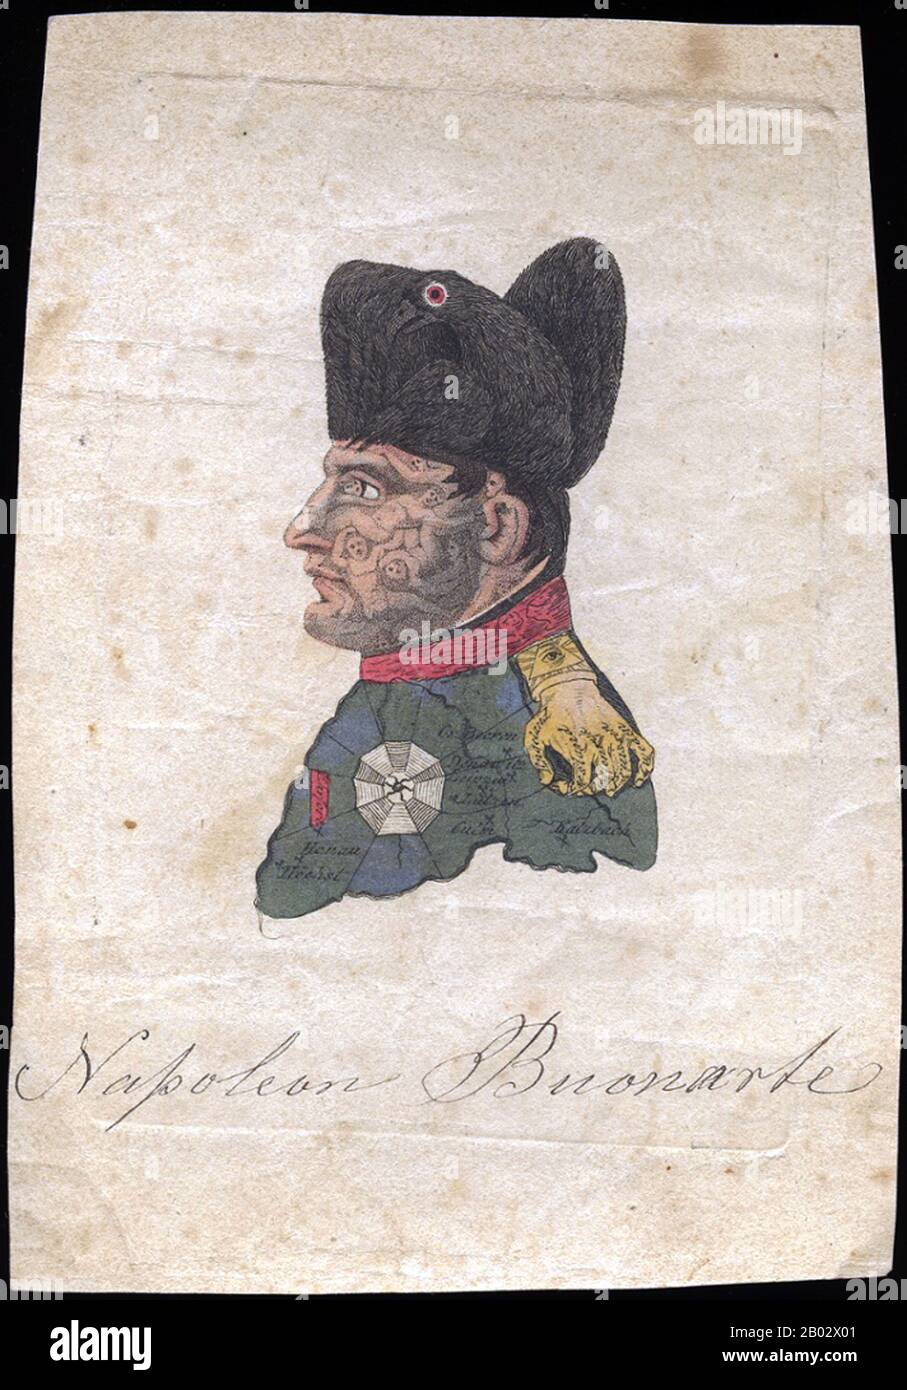 A satirical head and shoulders portrait of Napoleon. Napoleon's hat is an eagle representing Prussia, which has dug its claws into Napoleon by one interpretation, or is the 'discomfited French Eagle, maimed and crouching'.  Napoleon's face is formed of the bodies of the dead amassed during his campaigns; his collar is a sea of blood with a vessel below his ear; his jacket shows the Rhineland states, the dissolved Confederation that had been Napoleon's puppets; the order of the Legion of Honour shows the spider's web in which the Confederations' members had been caught; his epaulette is the 'Ha Stock Photo